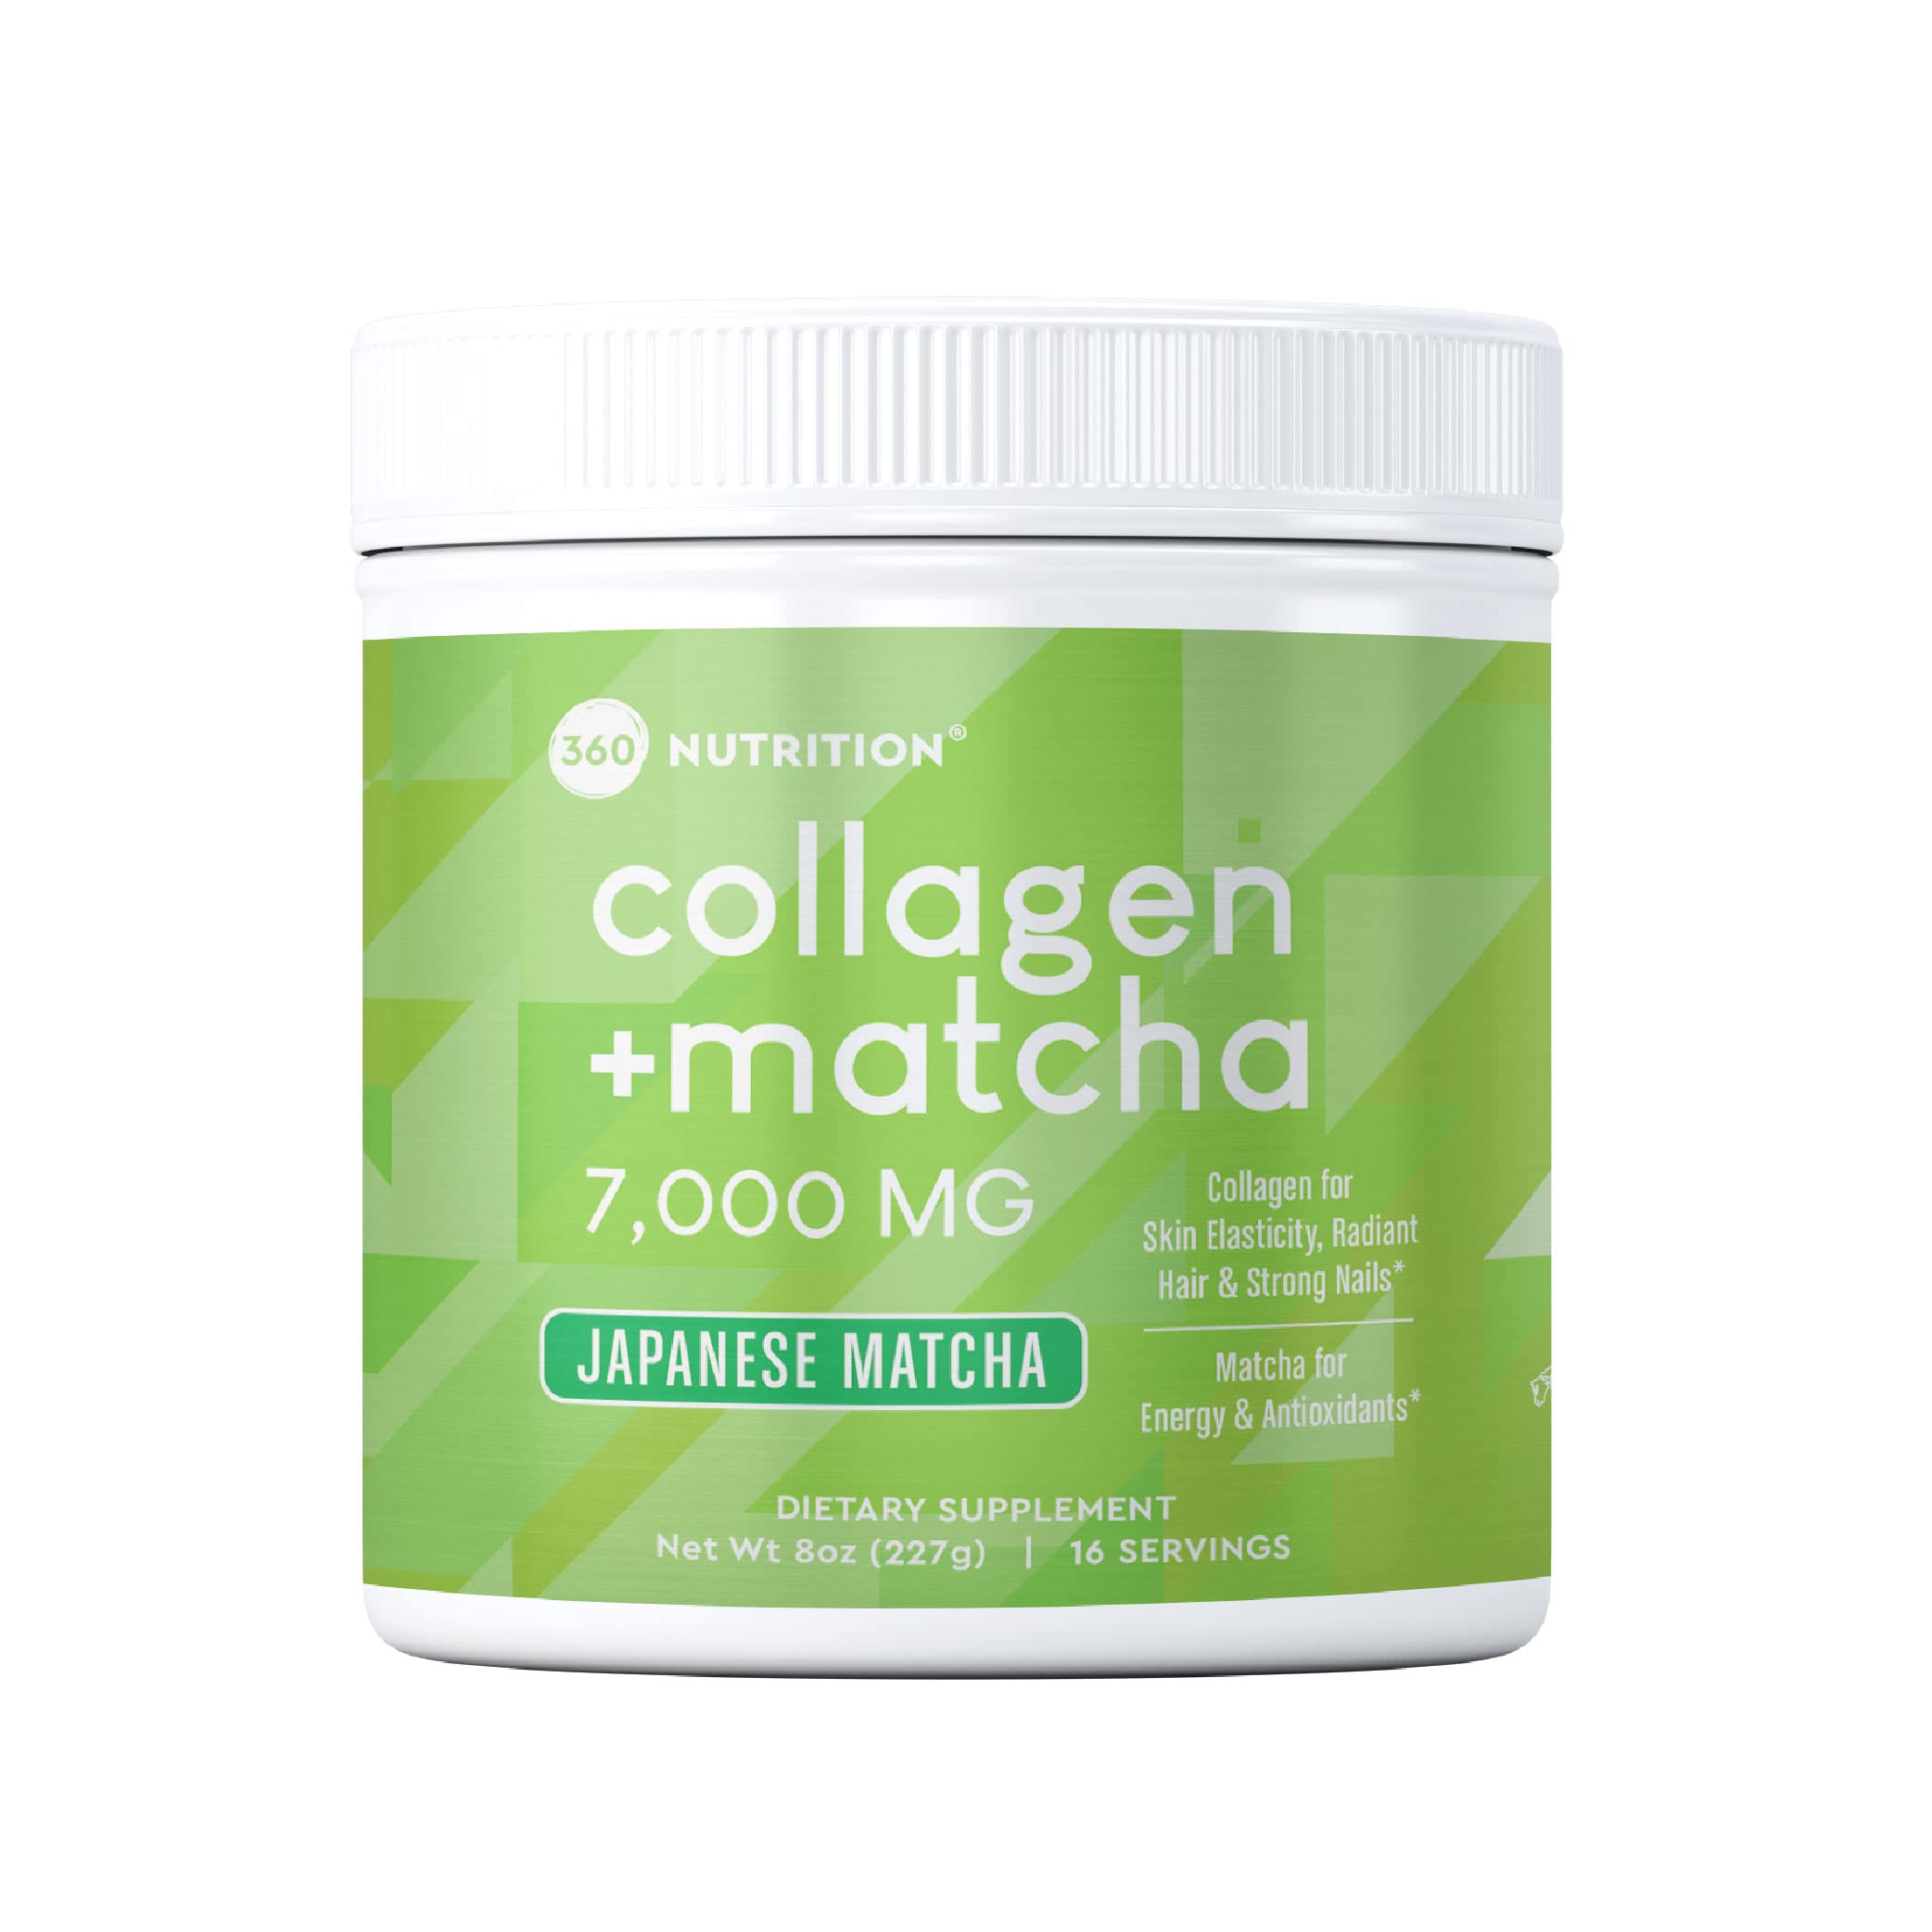 10-facts-about-collagen-matcha